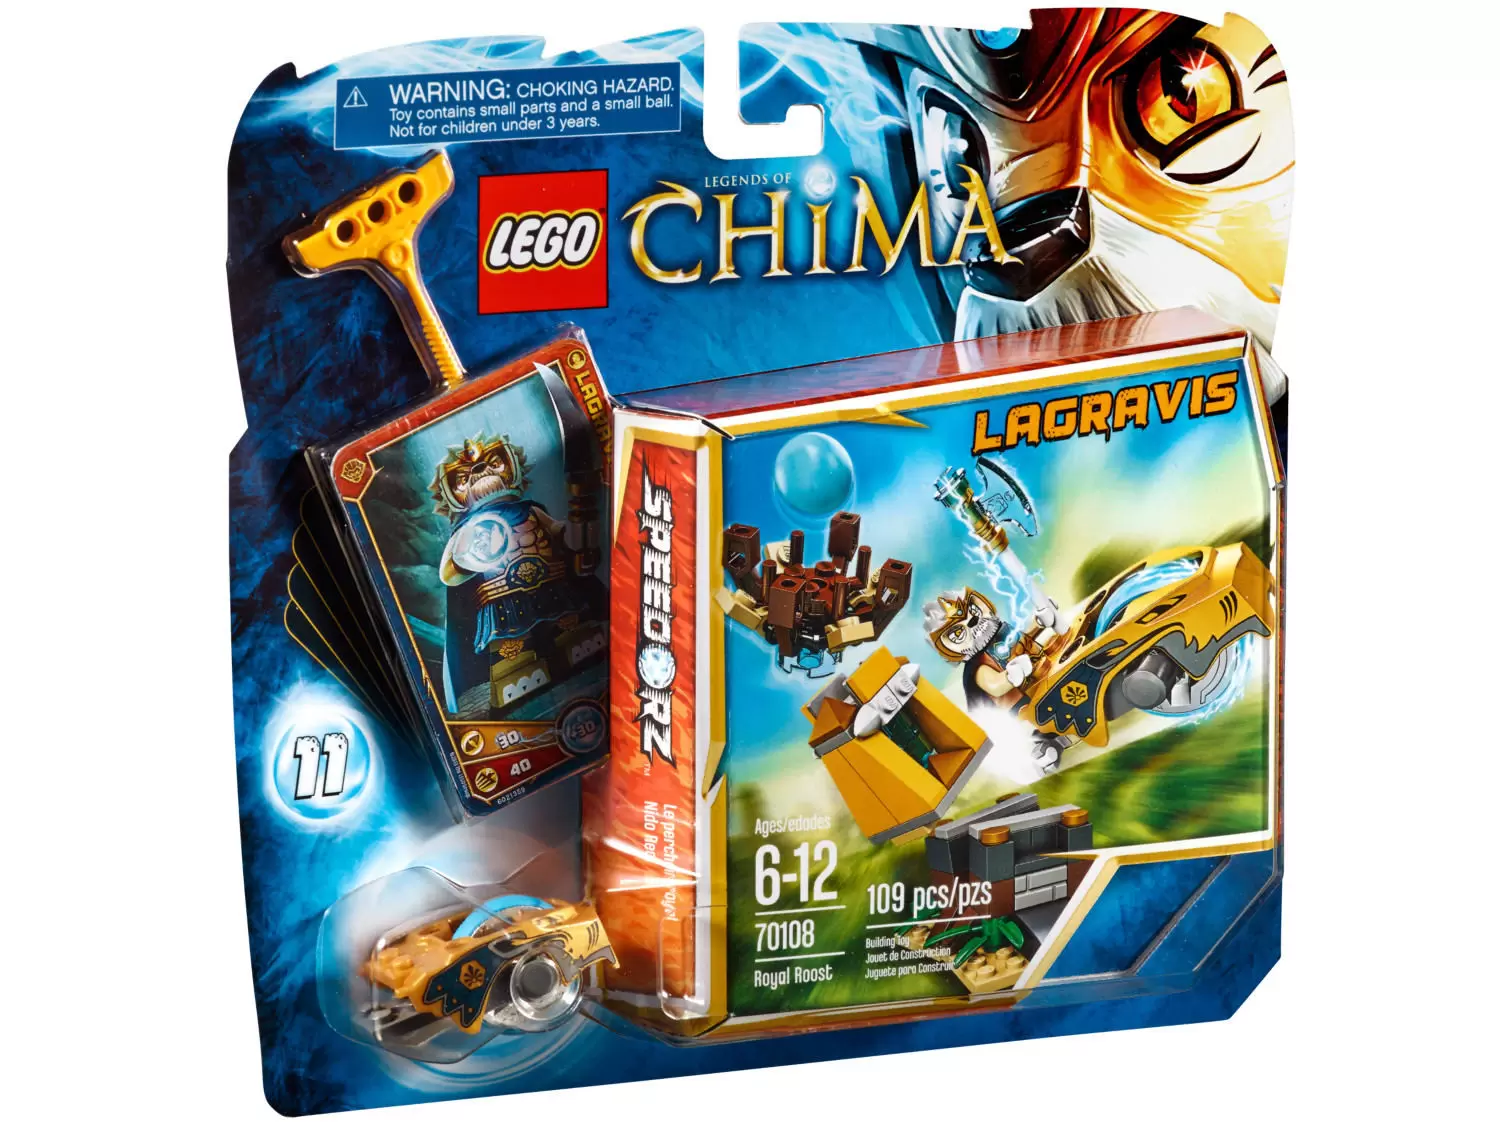 LEGO Legends of Chima - Royal Roost